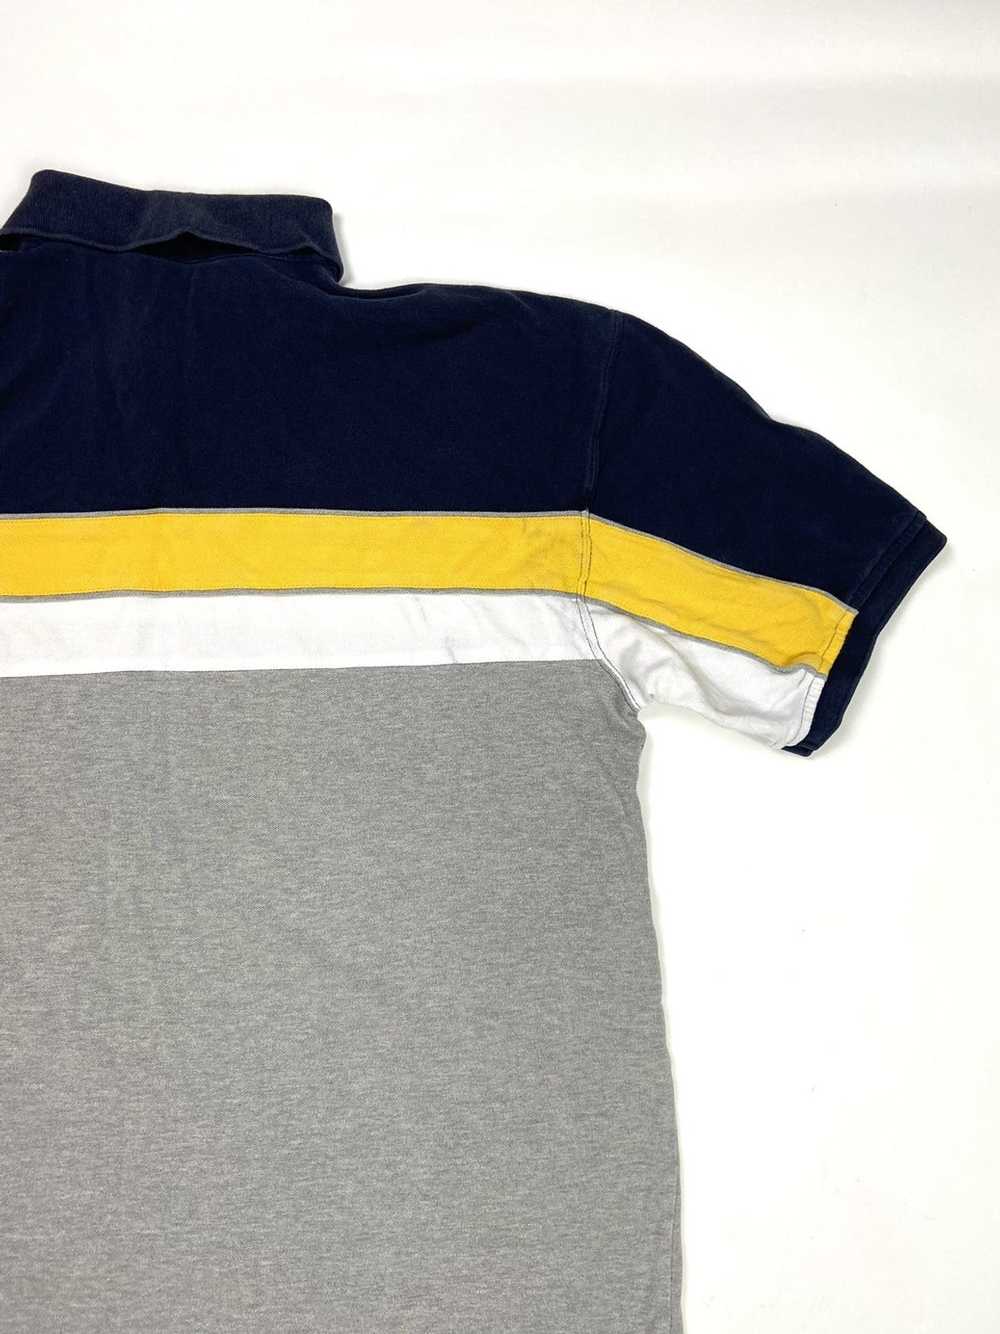 Tommy Jeans Vintage Tommy Jeans Polo Shirt - image 5